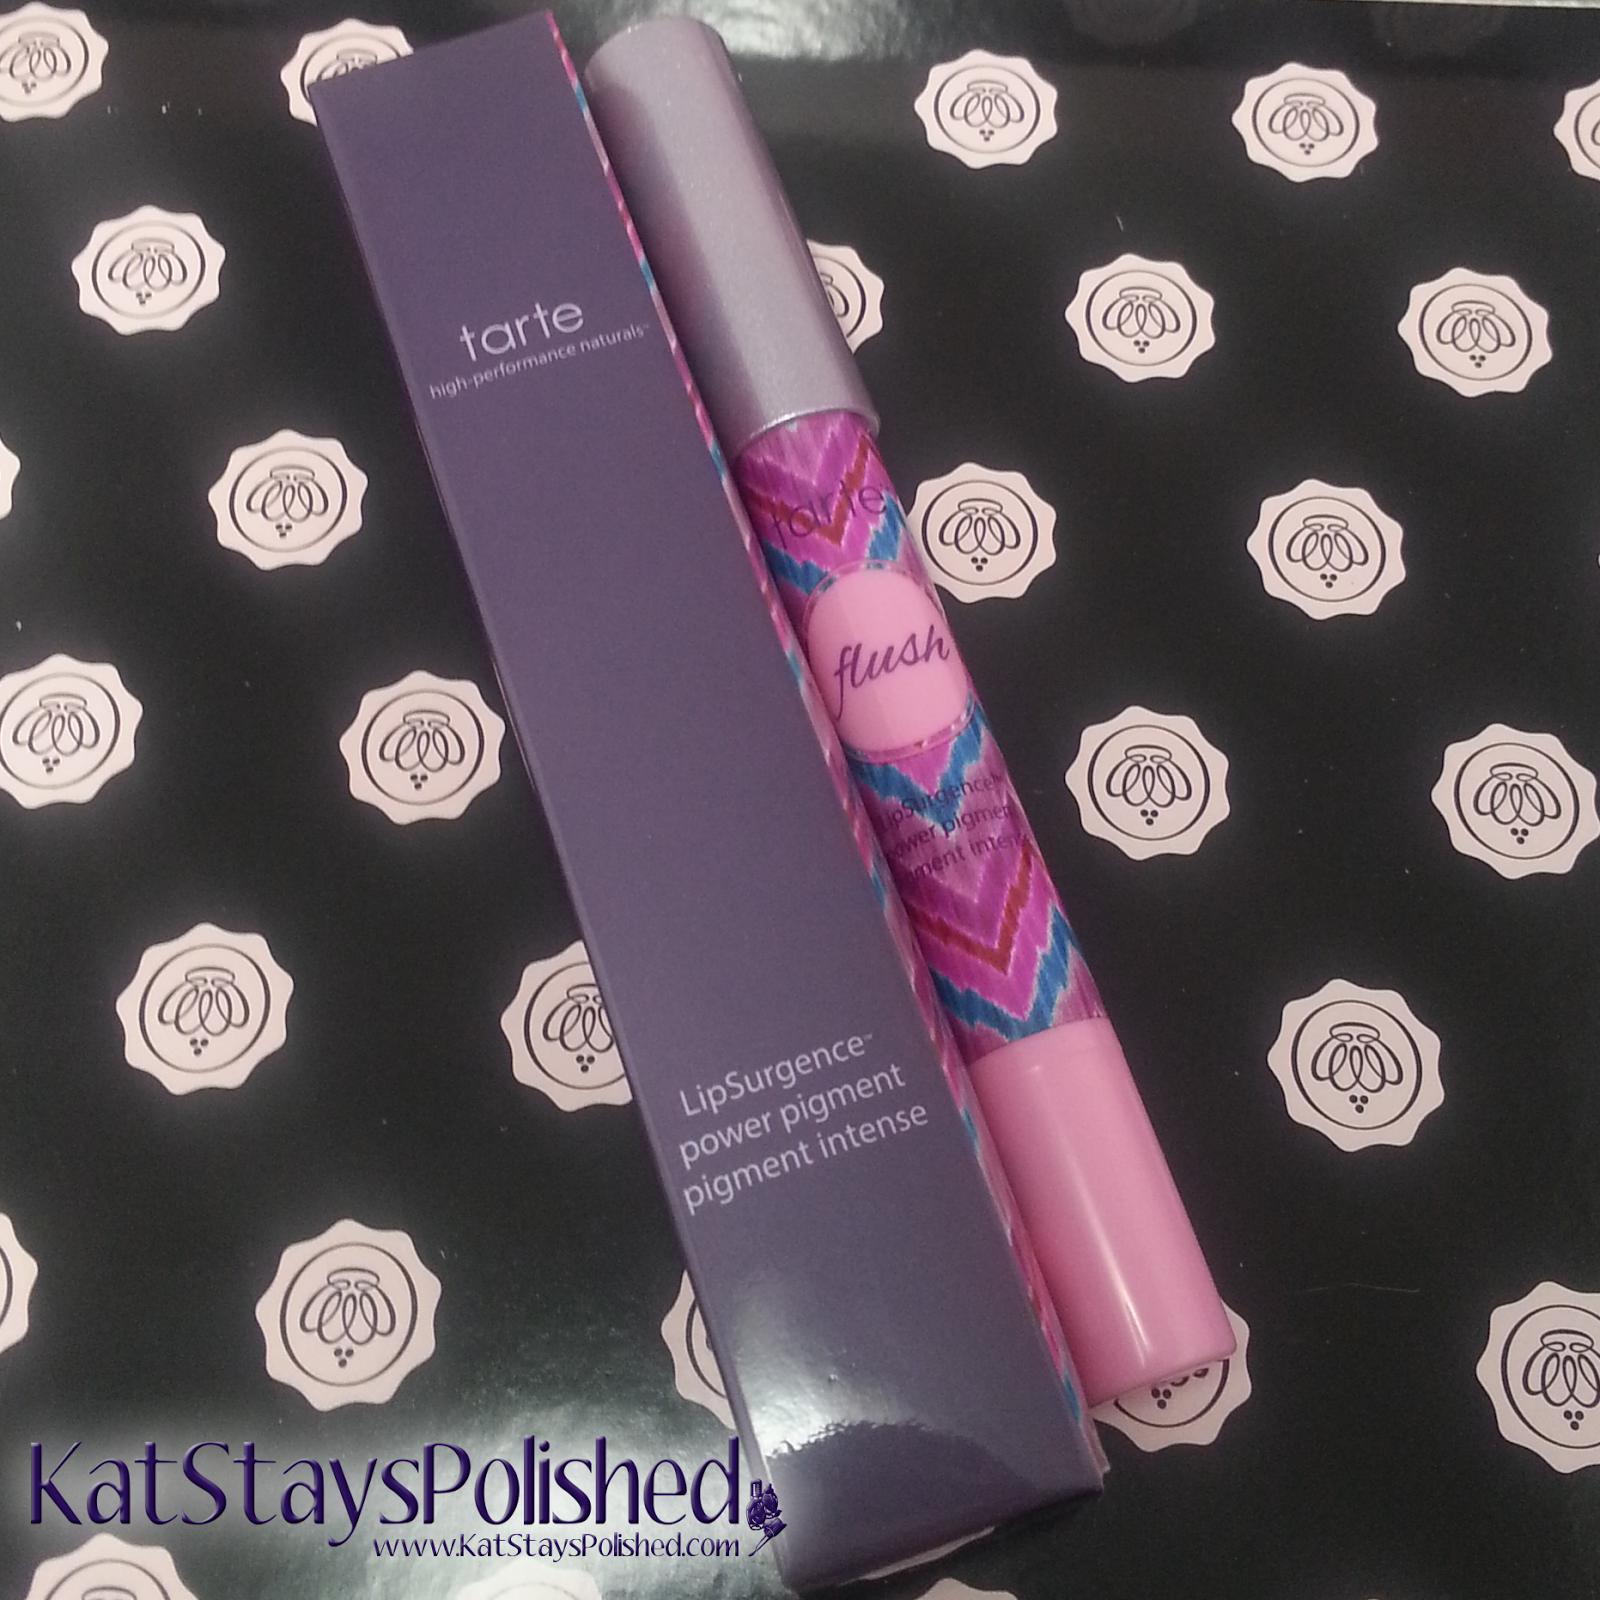 Glossybox October 2014 - Tarte Cosmetics: Power Pigment in Flush | Kat Stays Polished